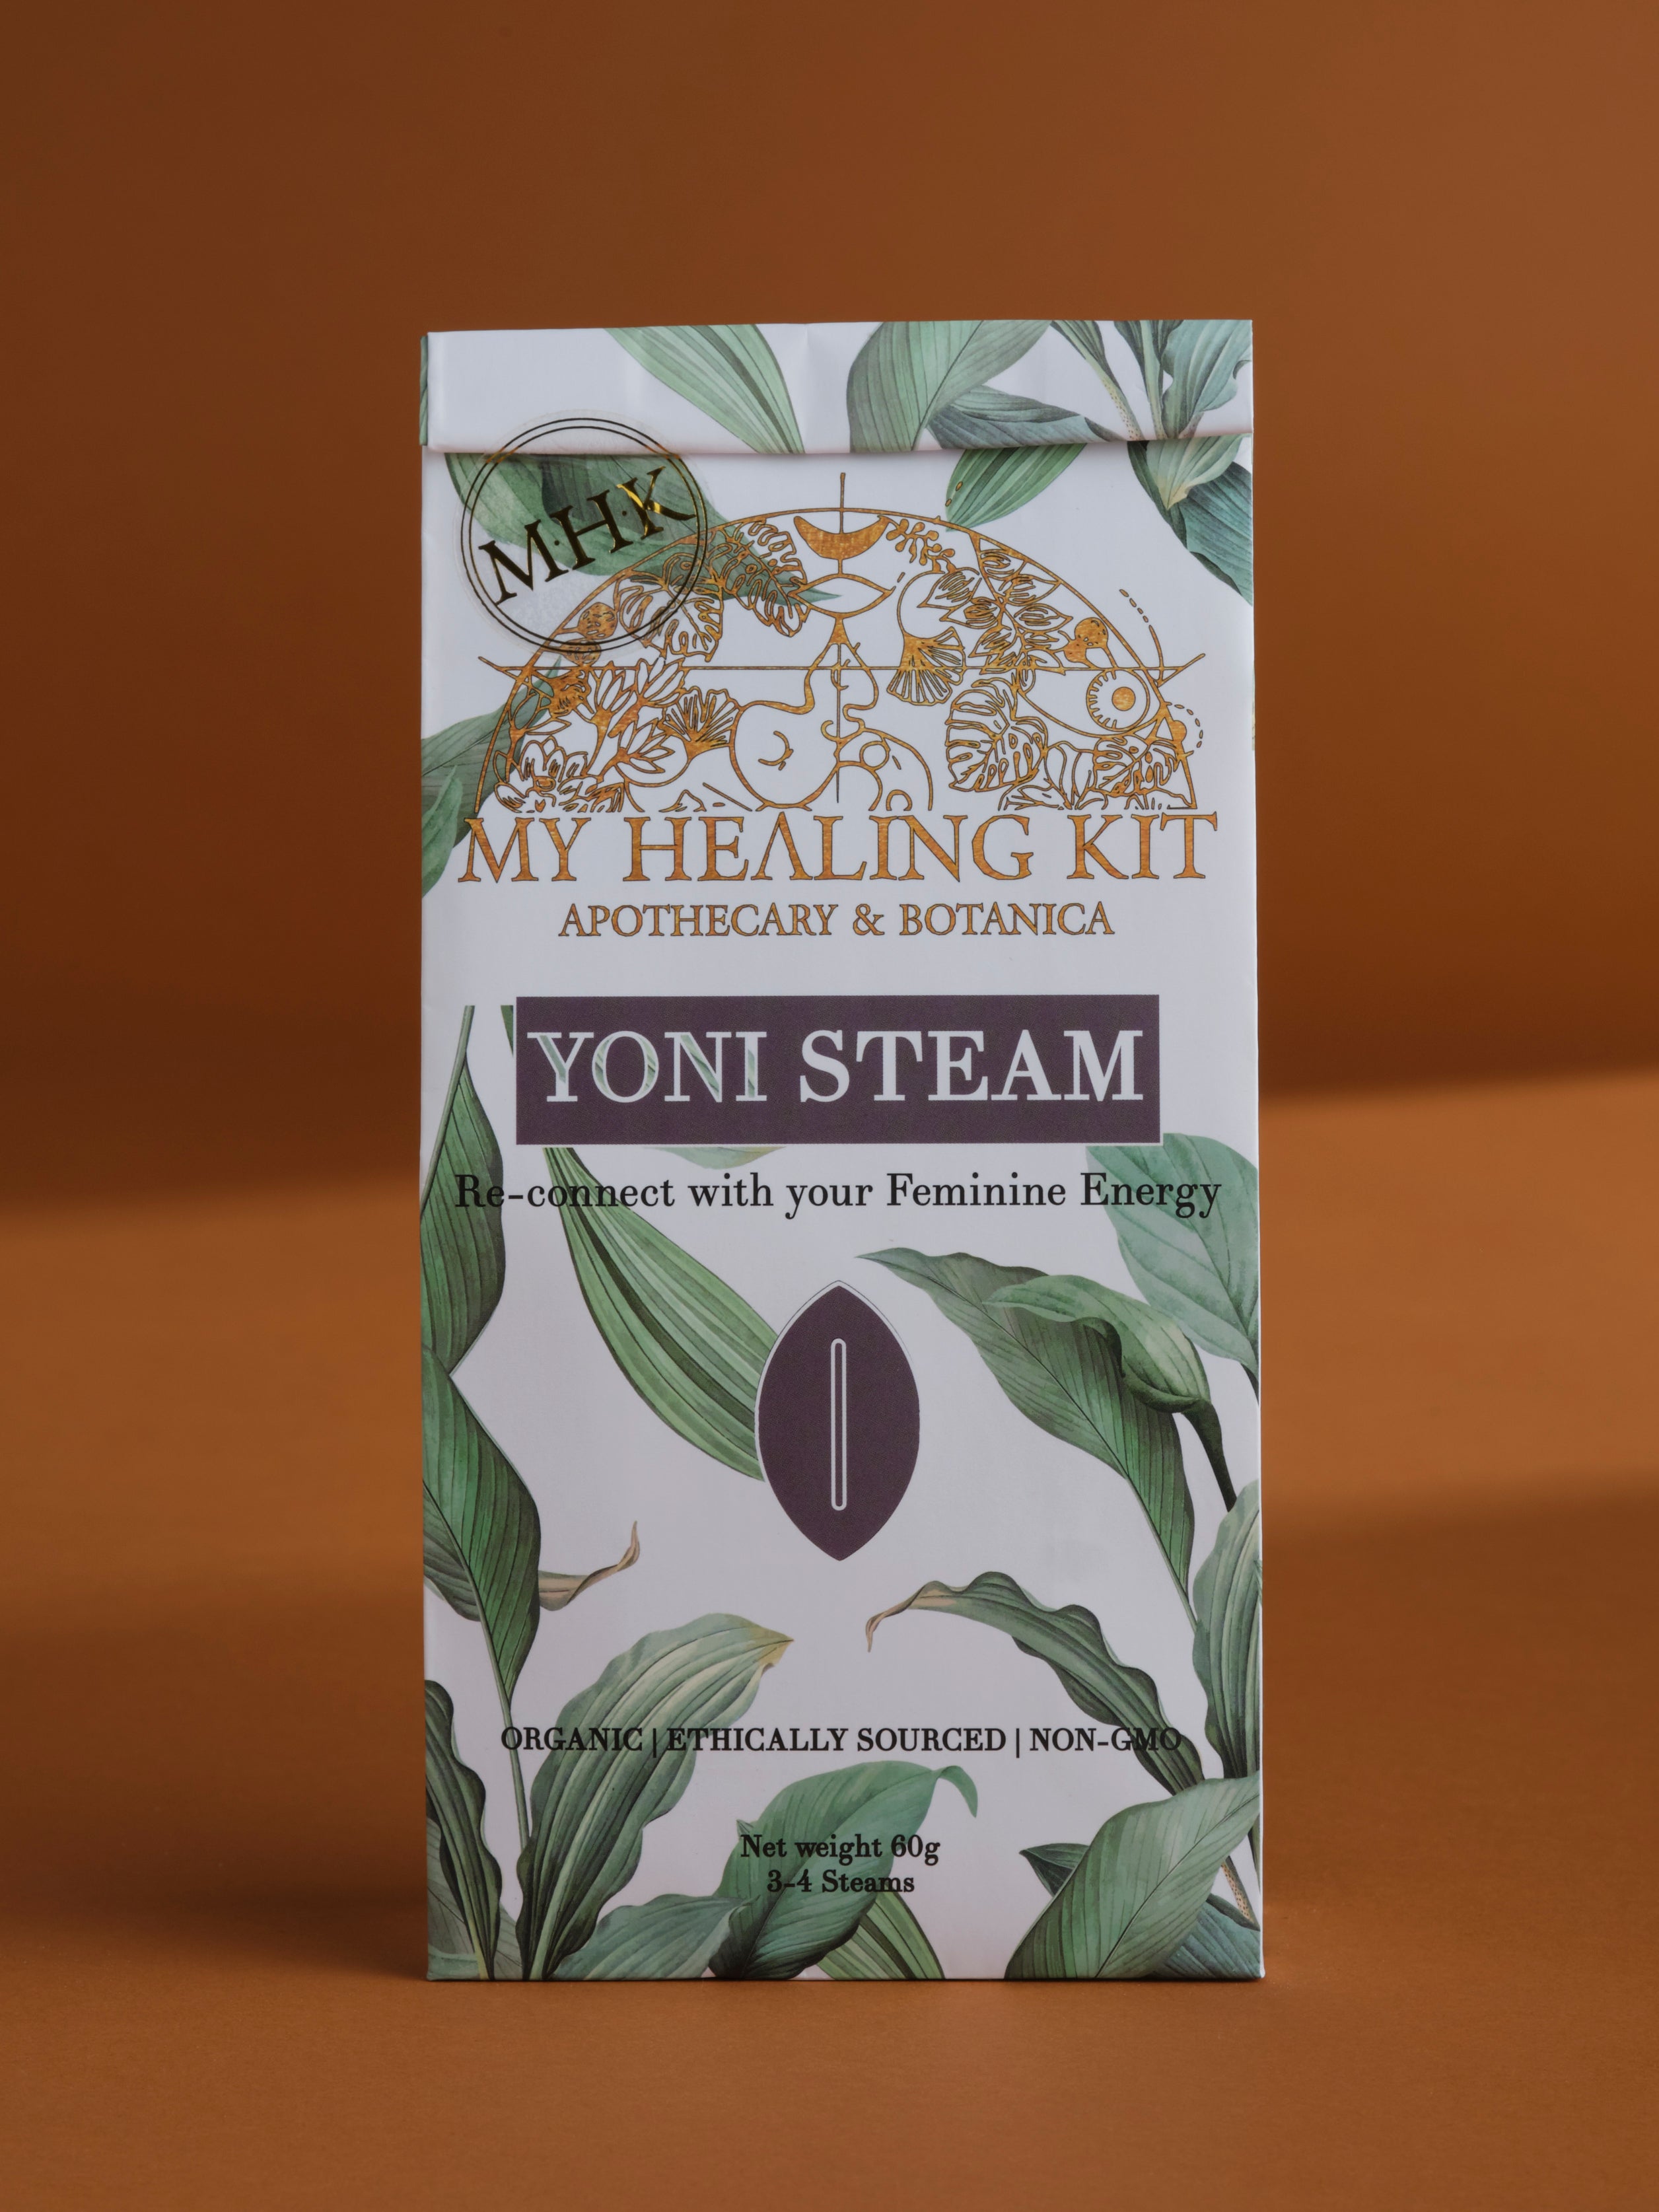 Herbal Yoni Steam is a relaxing setting with medicinal herbs for all-natural feminine care.